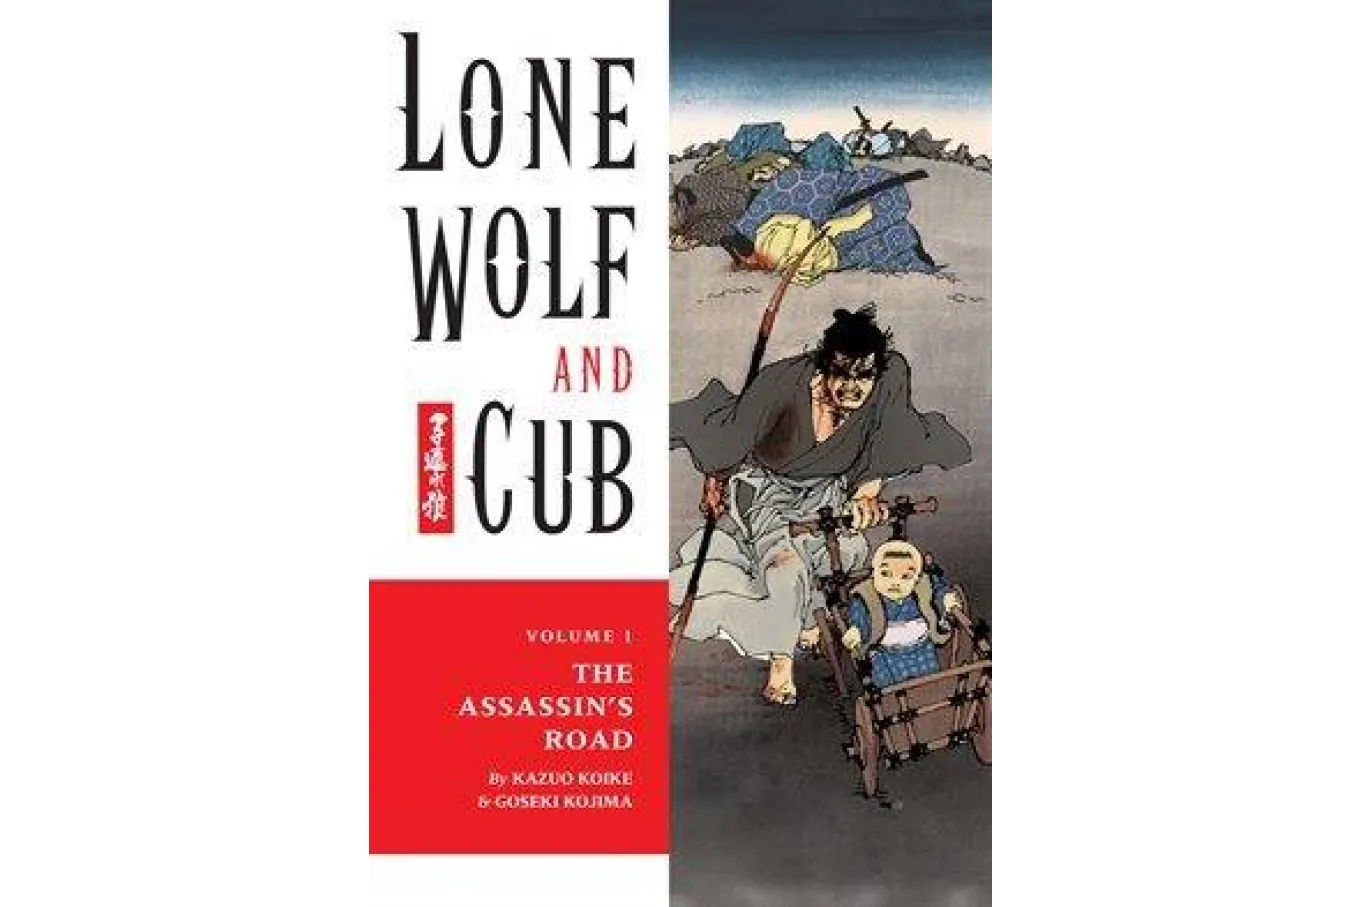 Lone Wolf and Cub book cover